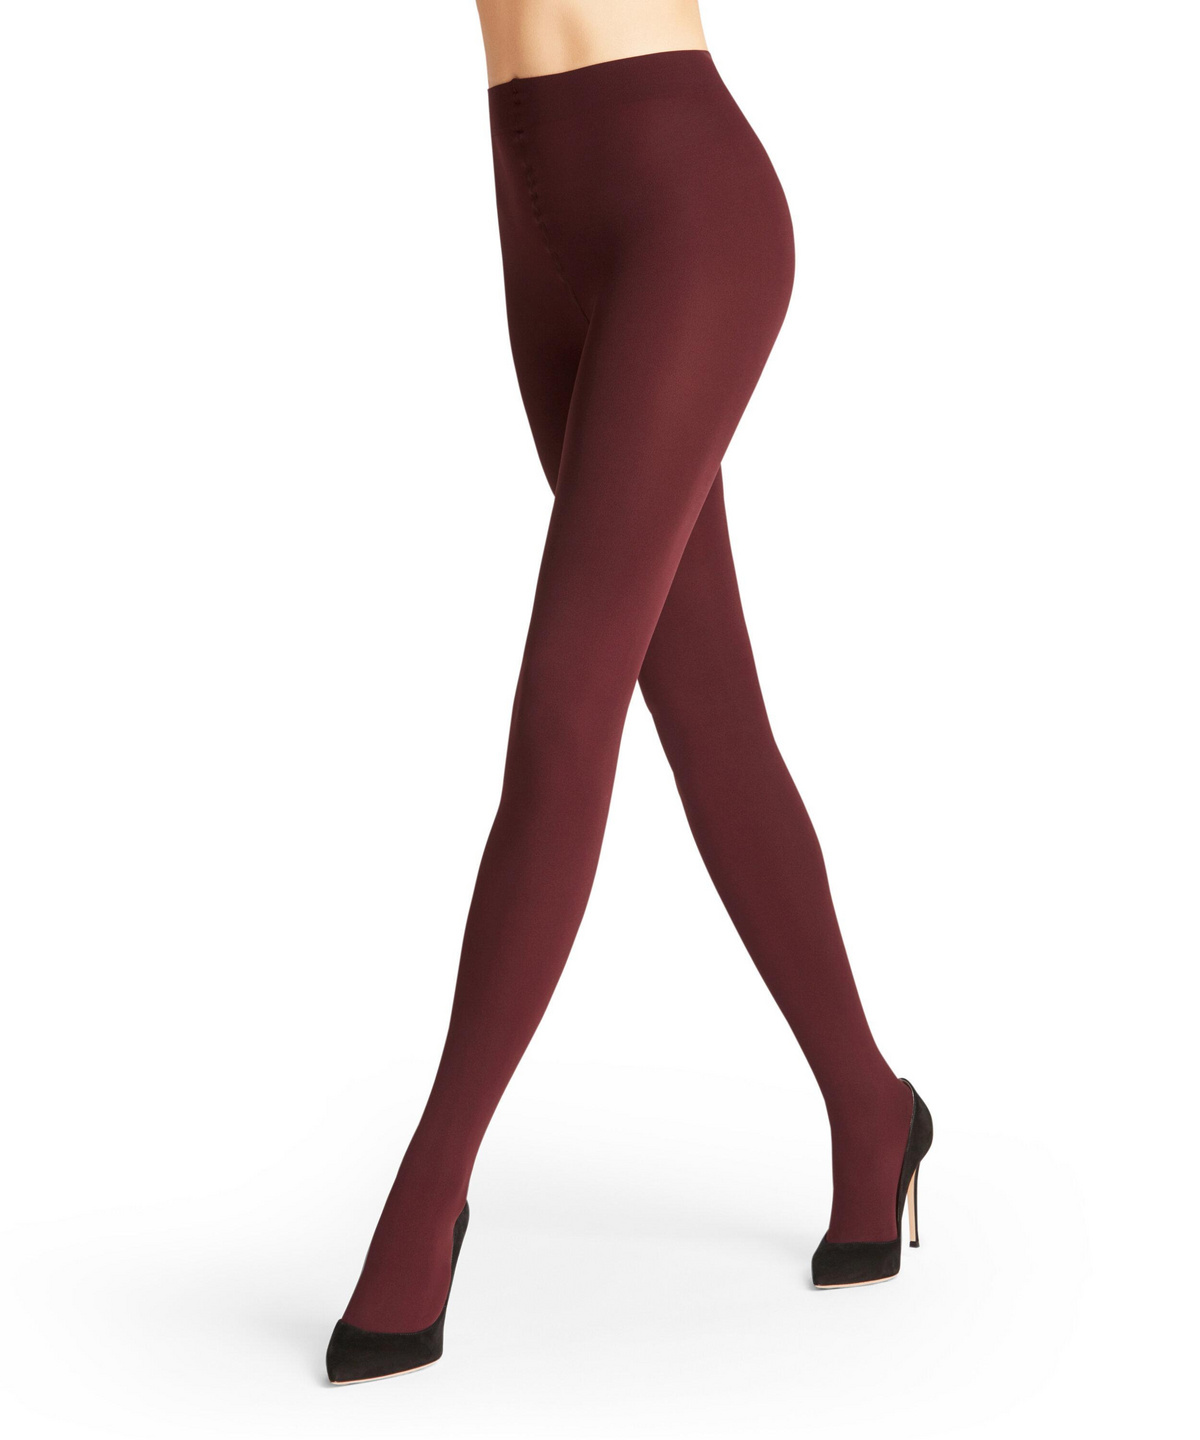 All In Motion High Rise Maroon Leggings NWT